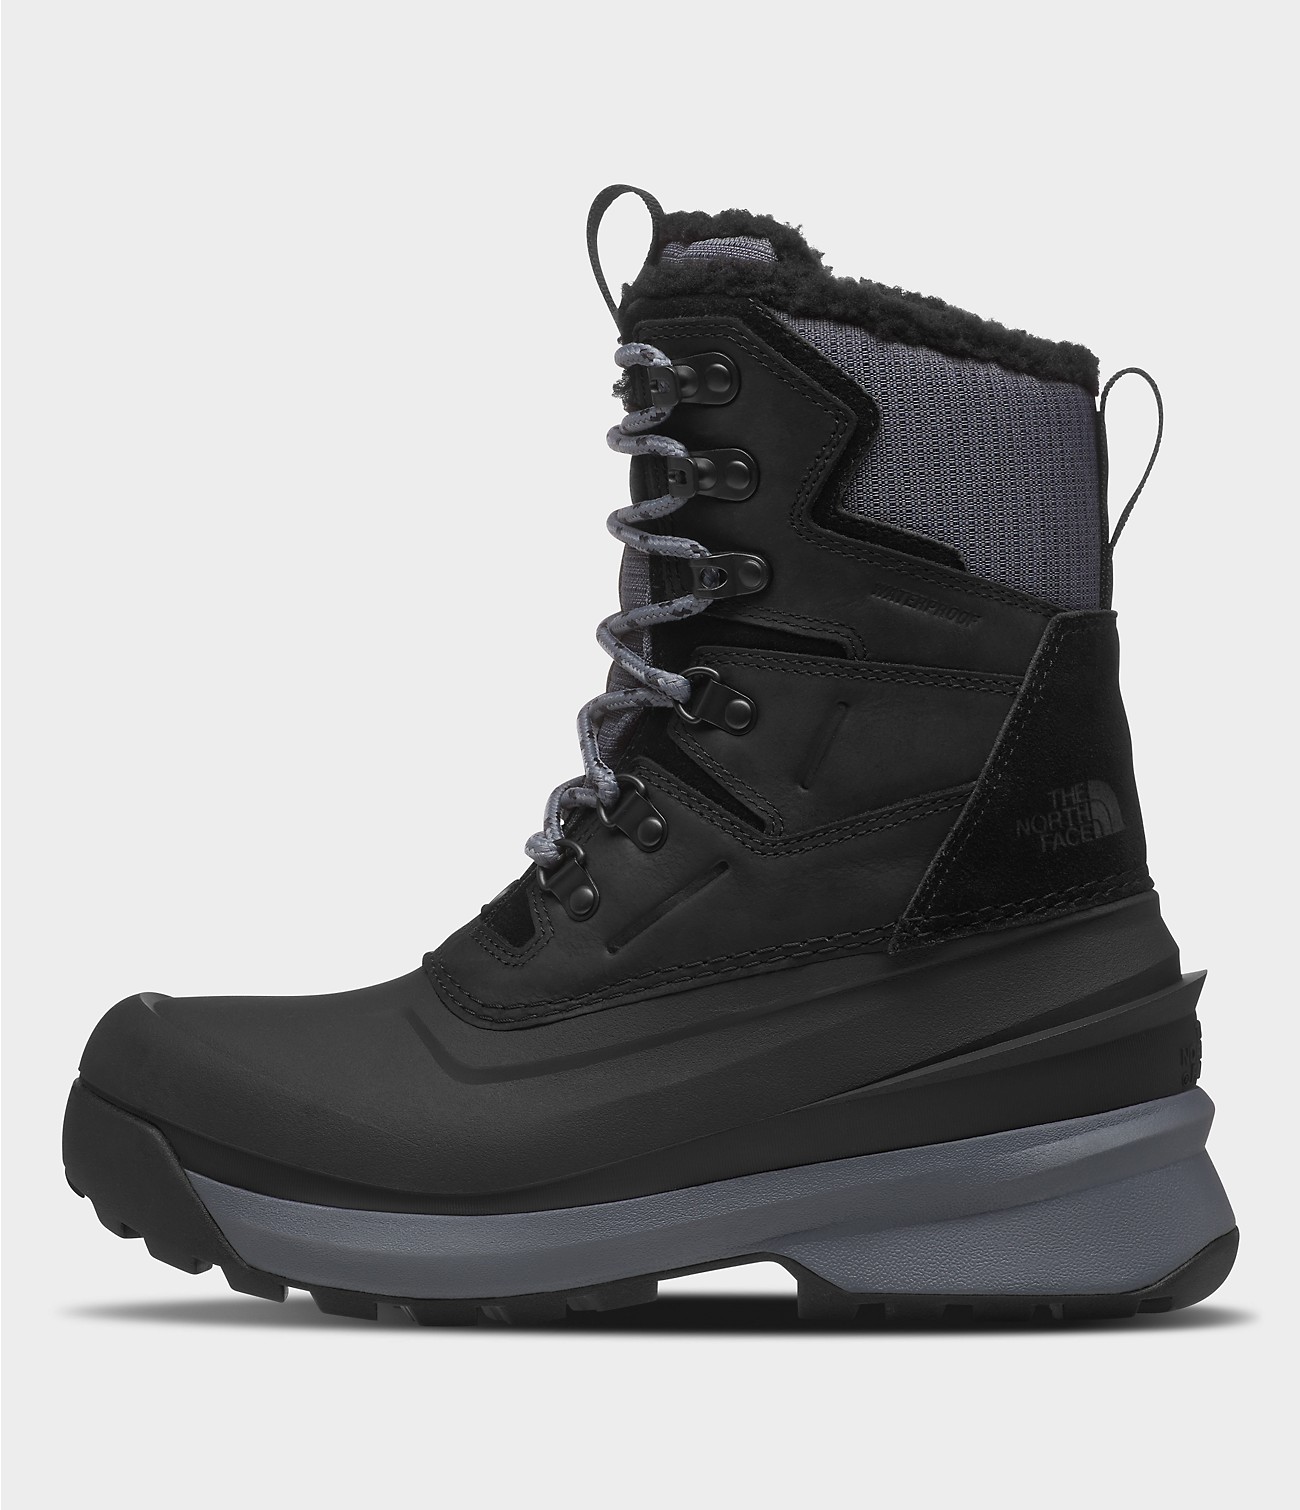 Unlock Wilderness' choice in the Timberland Vs North Face comparison, the Chilkat V 400 Waterproof Boots by The North Face